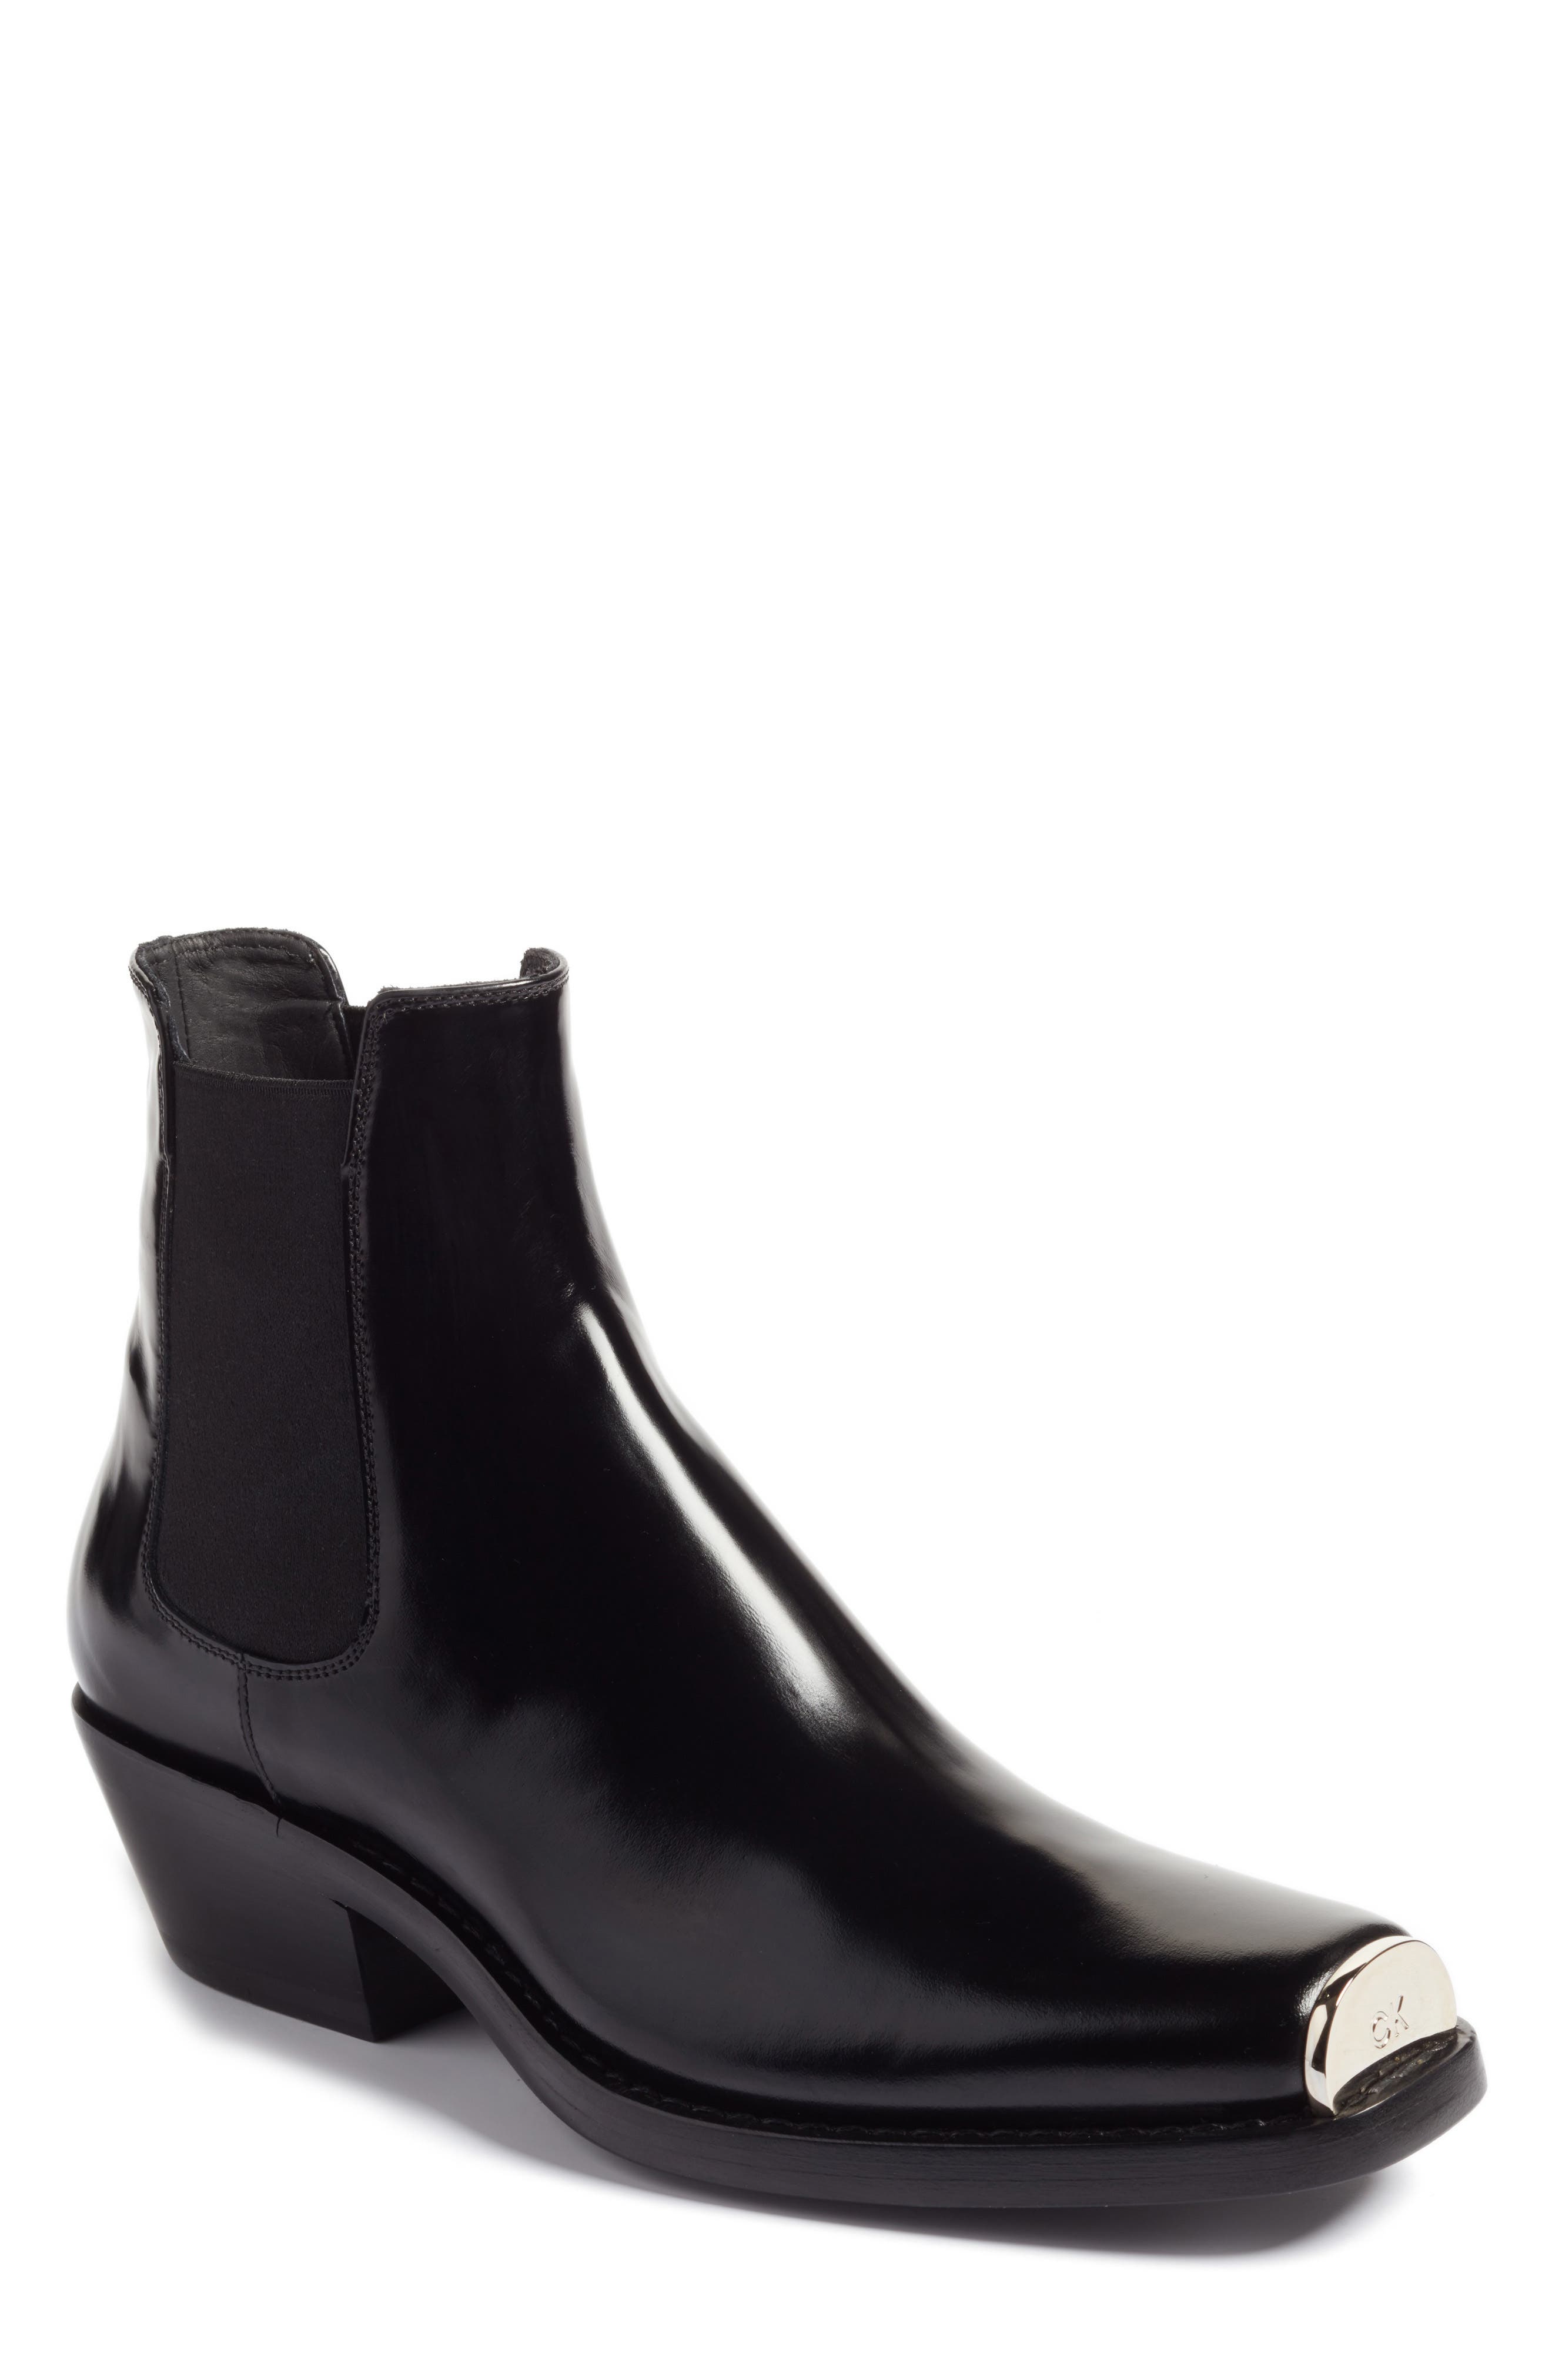 CALVIN KLEIN 205W39NYC WESTERN CLAIRE LEATHER ANKLE BOOTS, BLACK ...